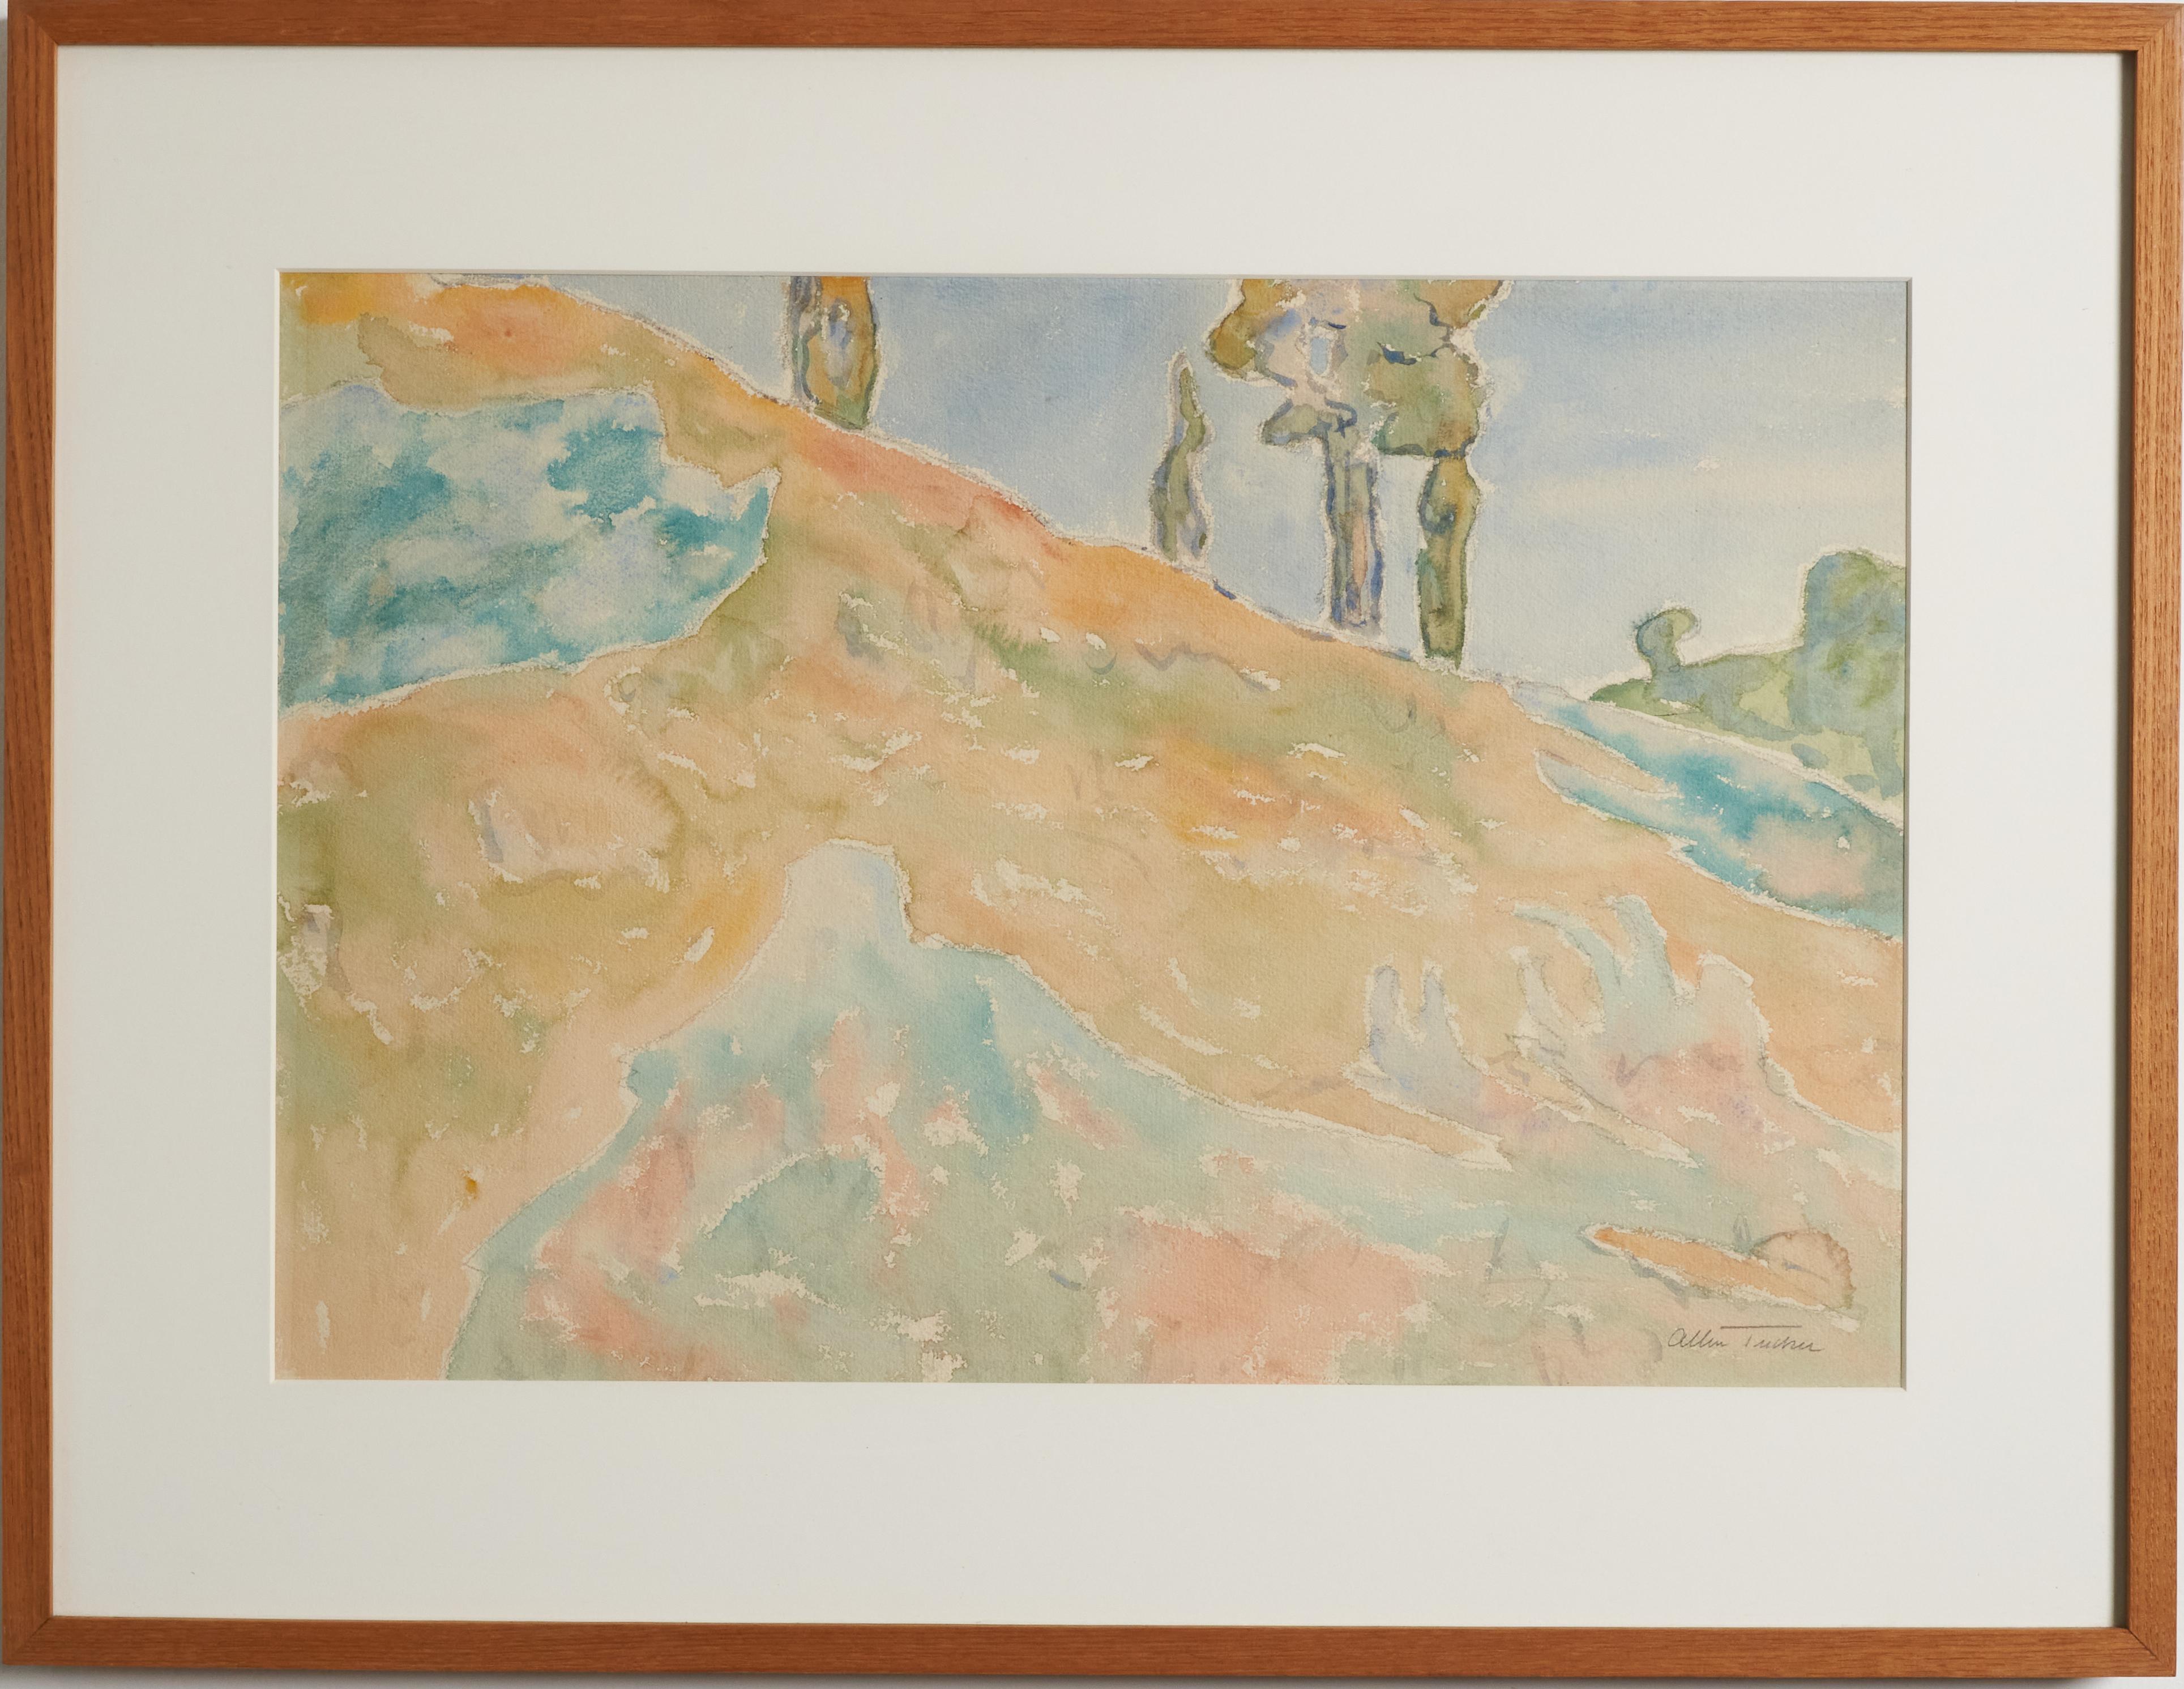 Signed Allen Tucker (American,1866-1939). 'Sunny Hillside with Trees at Crest'. Watercolor painting on paper, circa 1930's. Signed Allen Tucker, lower right.

Allen Tucker, was an architect and painter, whose work was influenced by Vincent Van Gogh,